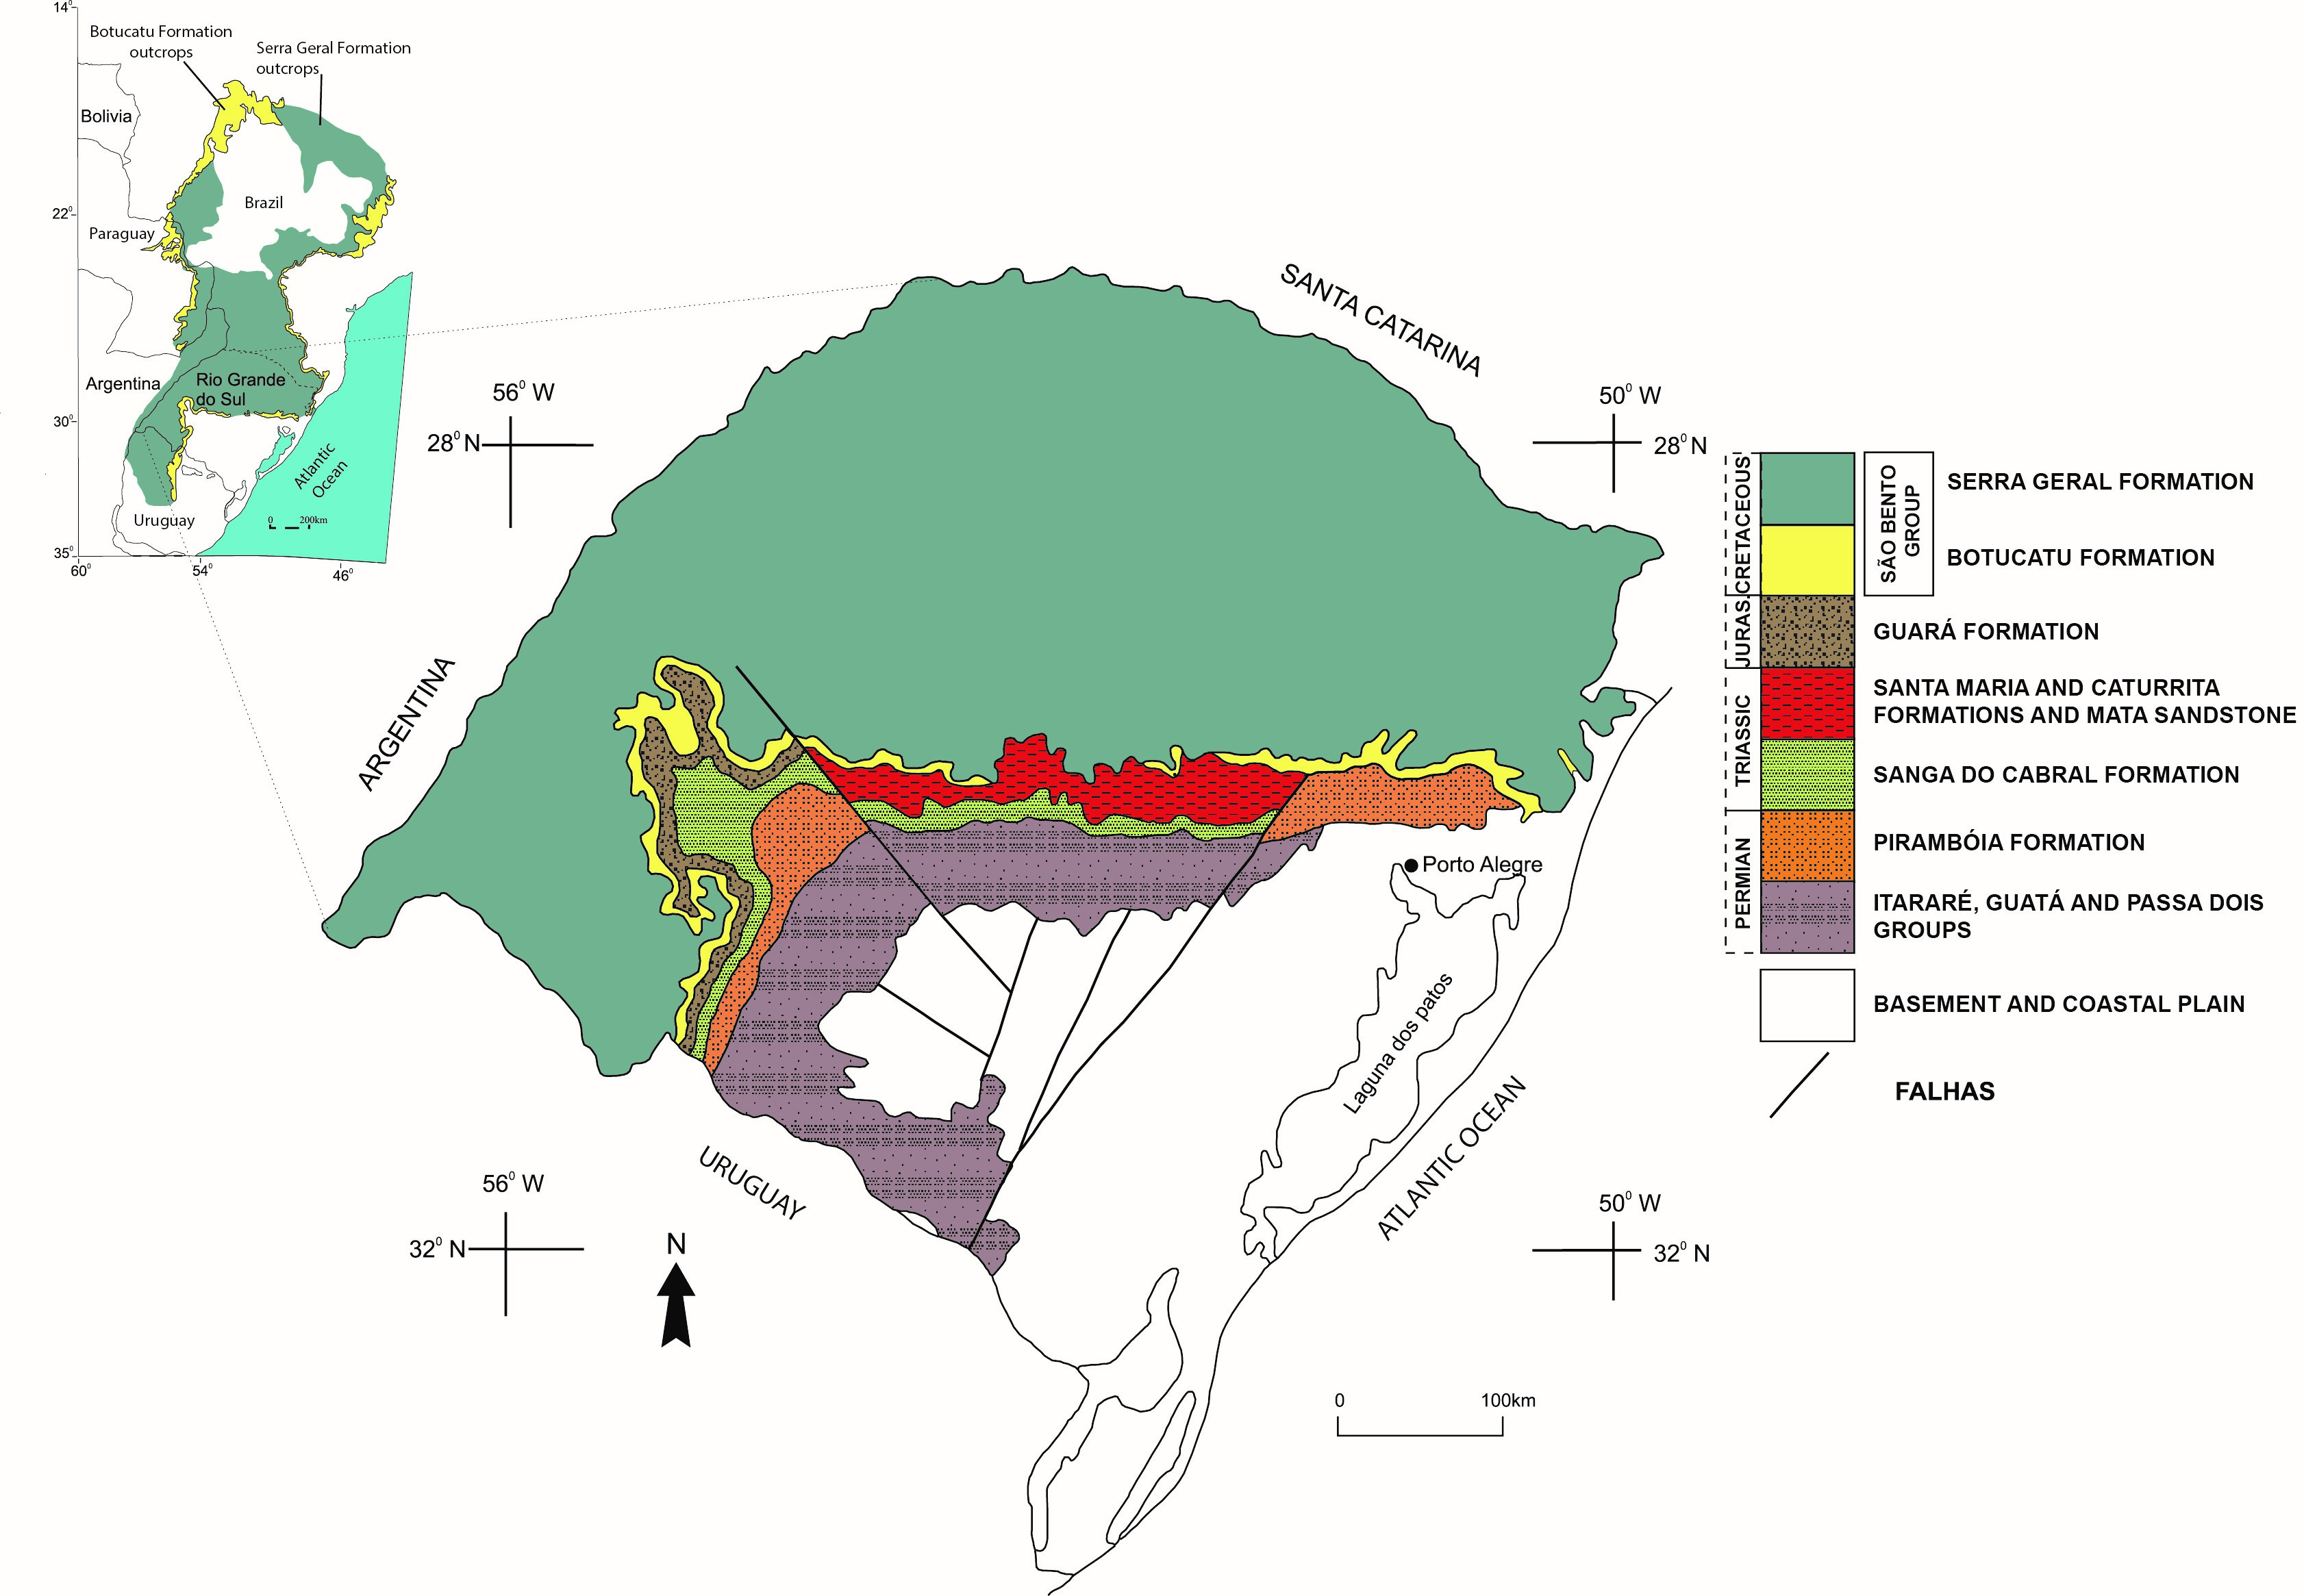 Figure 1. Simplified geological map of Paraná Basin in Rio Grande do Sul state, Brazil. (modified from Scherer & Lavina, 2005)[1]